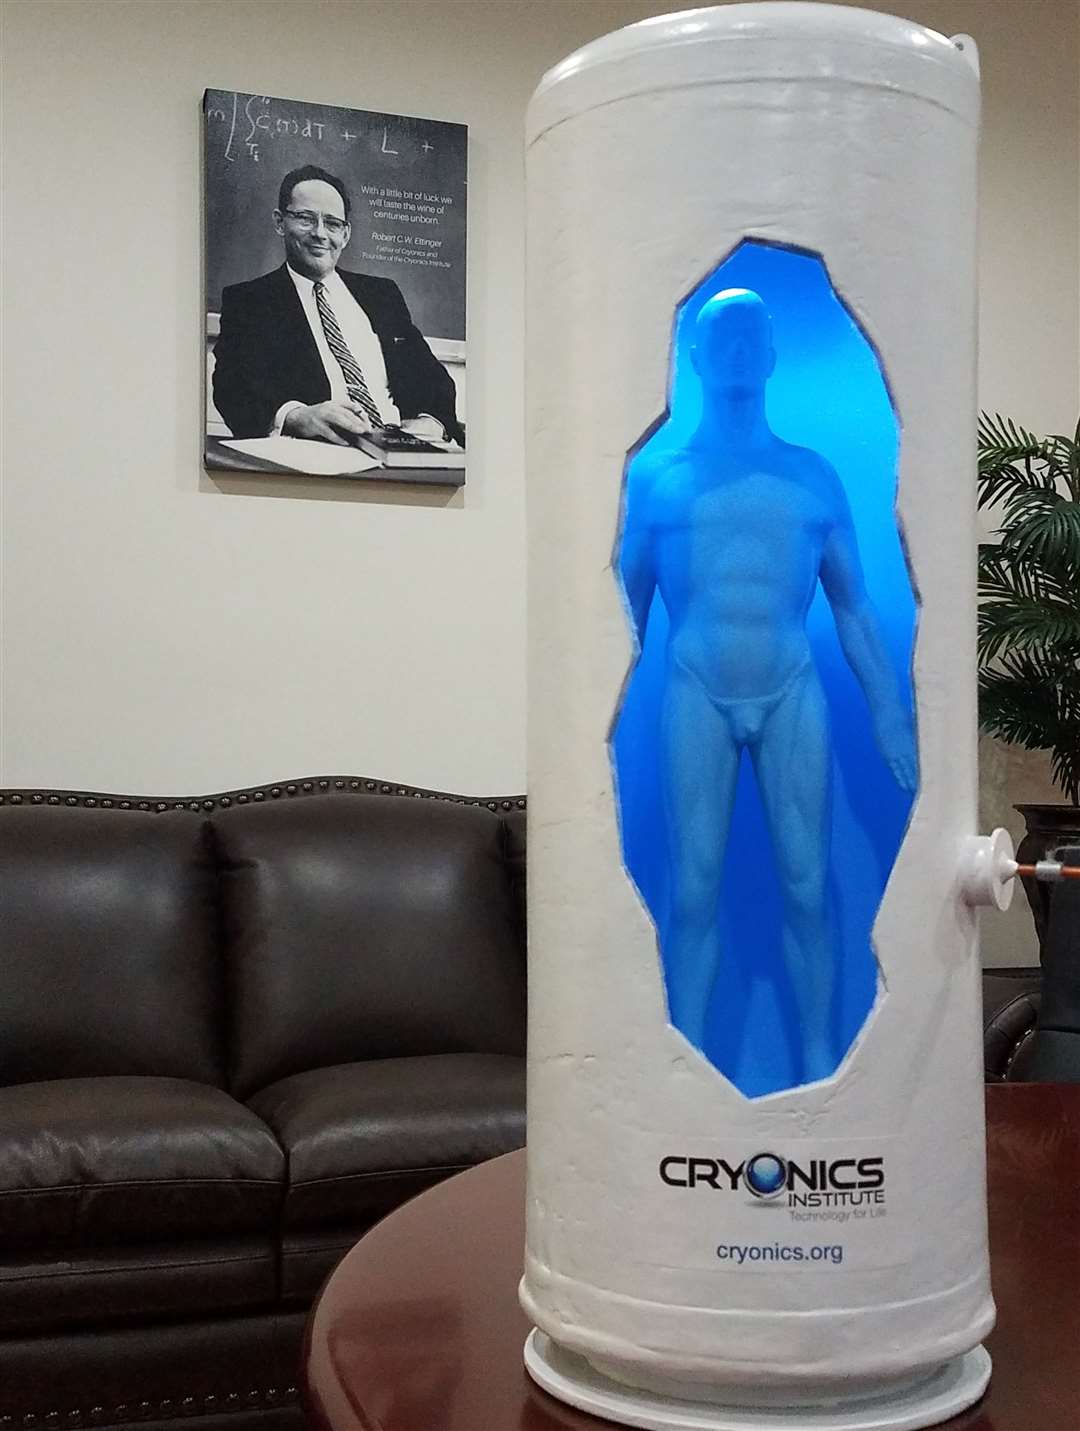 A model of the inside of a chamber at the Cryonics Institute